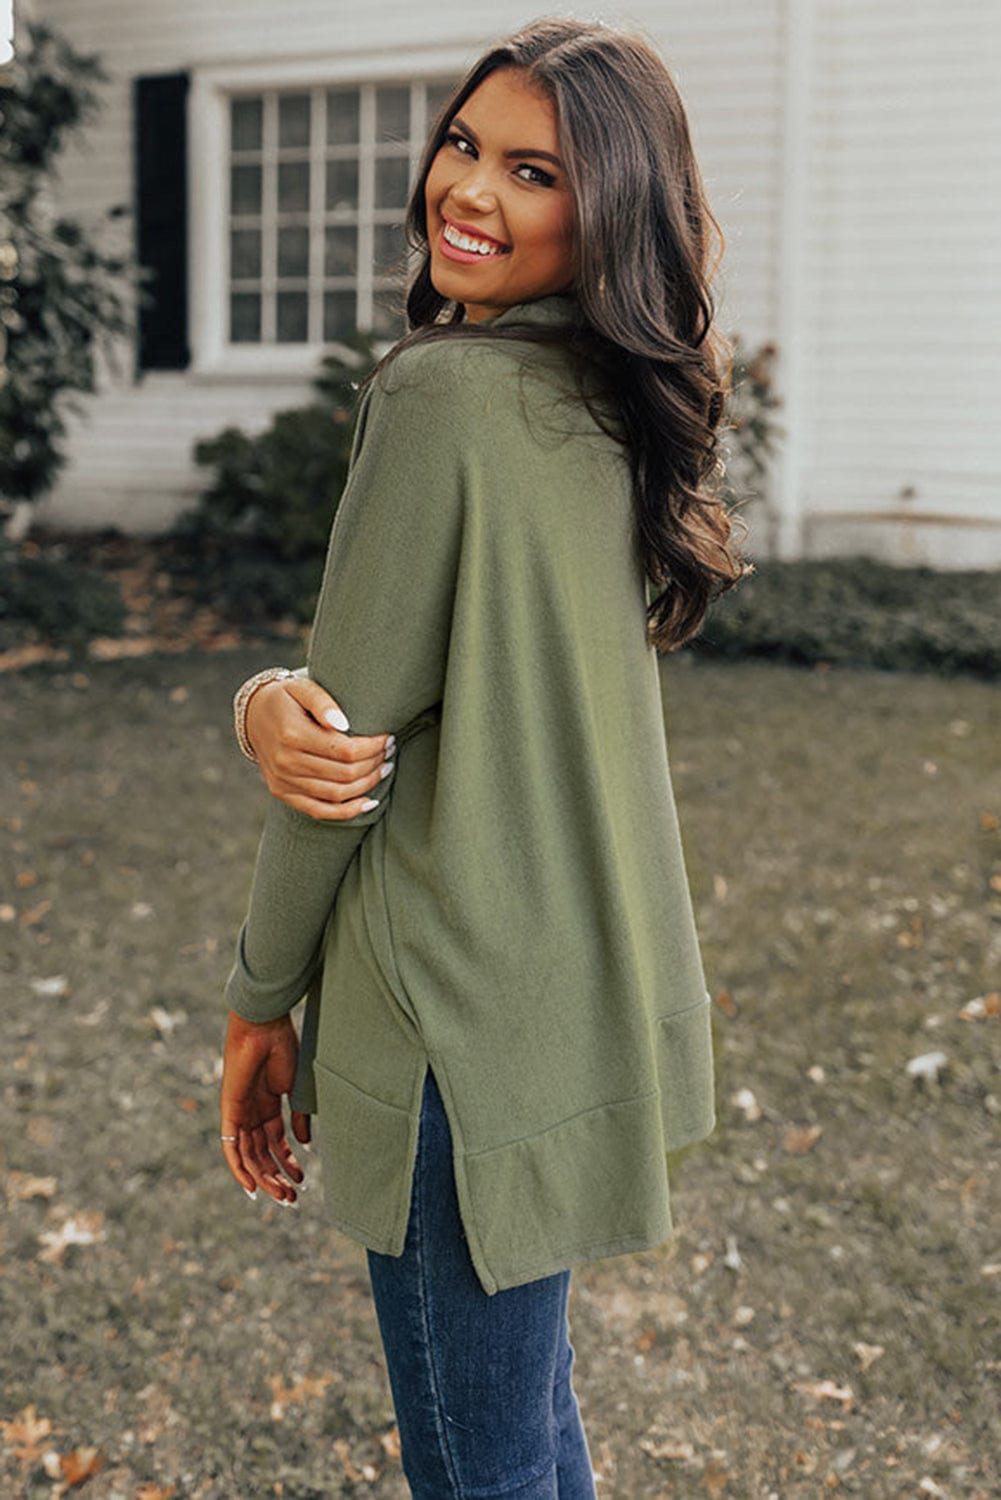 The802Gypsy  Tops/Long Sleeve Tops ❤️TRAVELING GYPSY-Cowl Neck Tunic Top